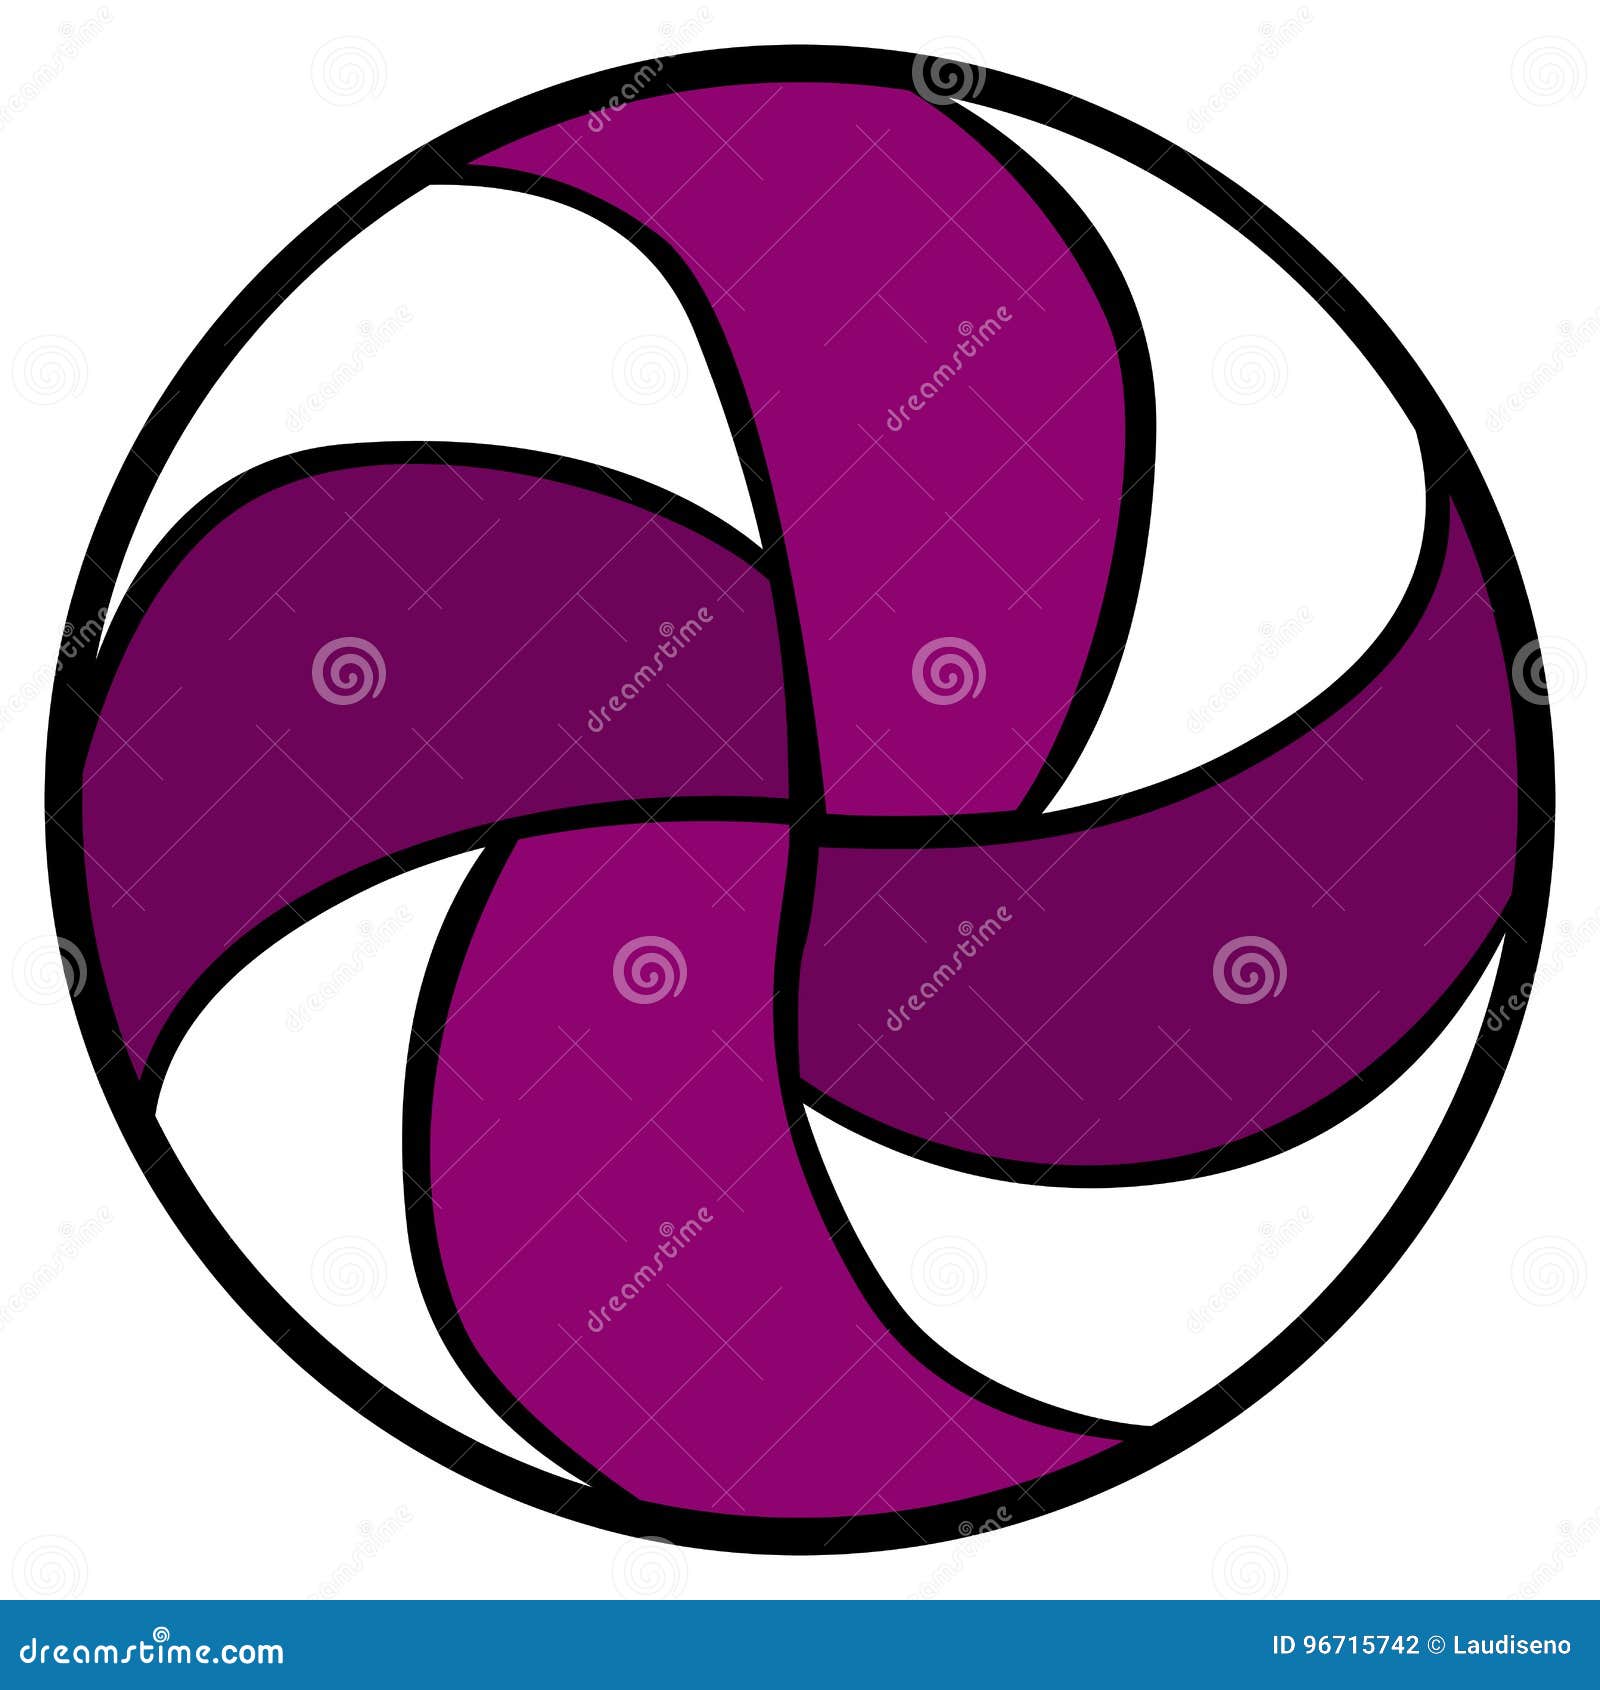 Isolated volleyball ball stock vector. Illustration of circle - 96715742